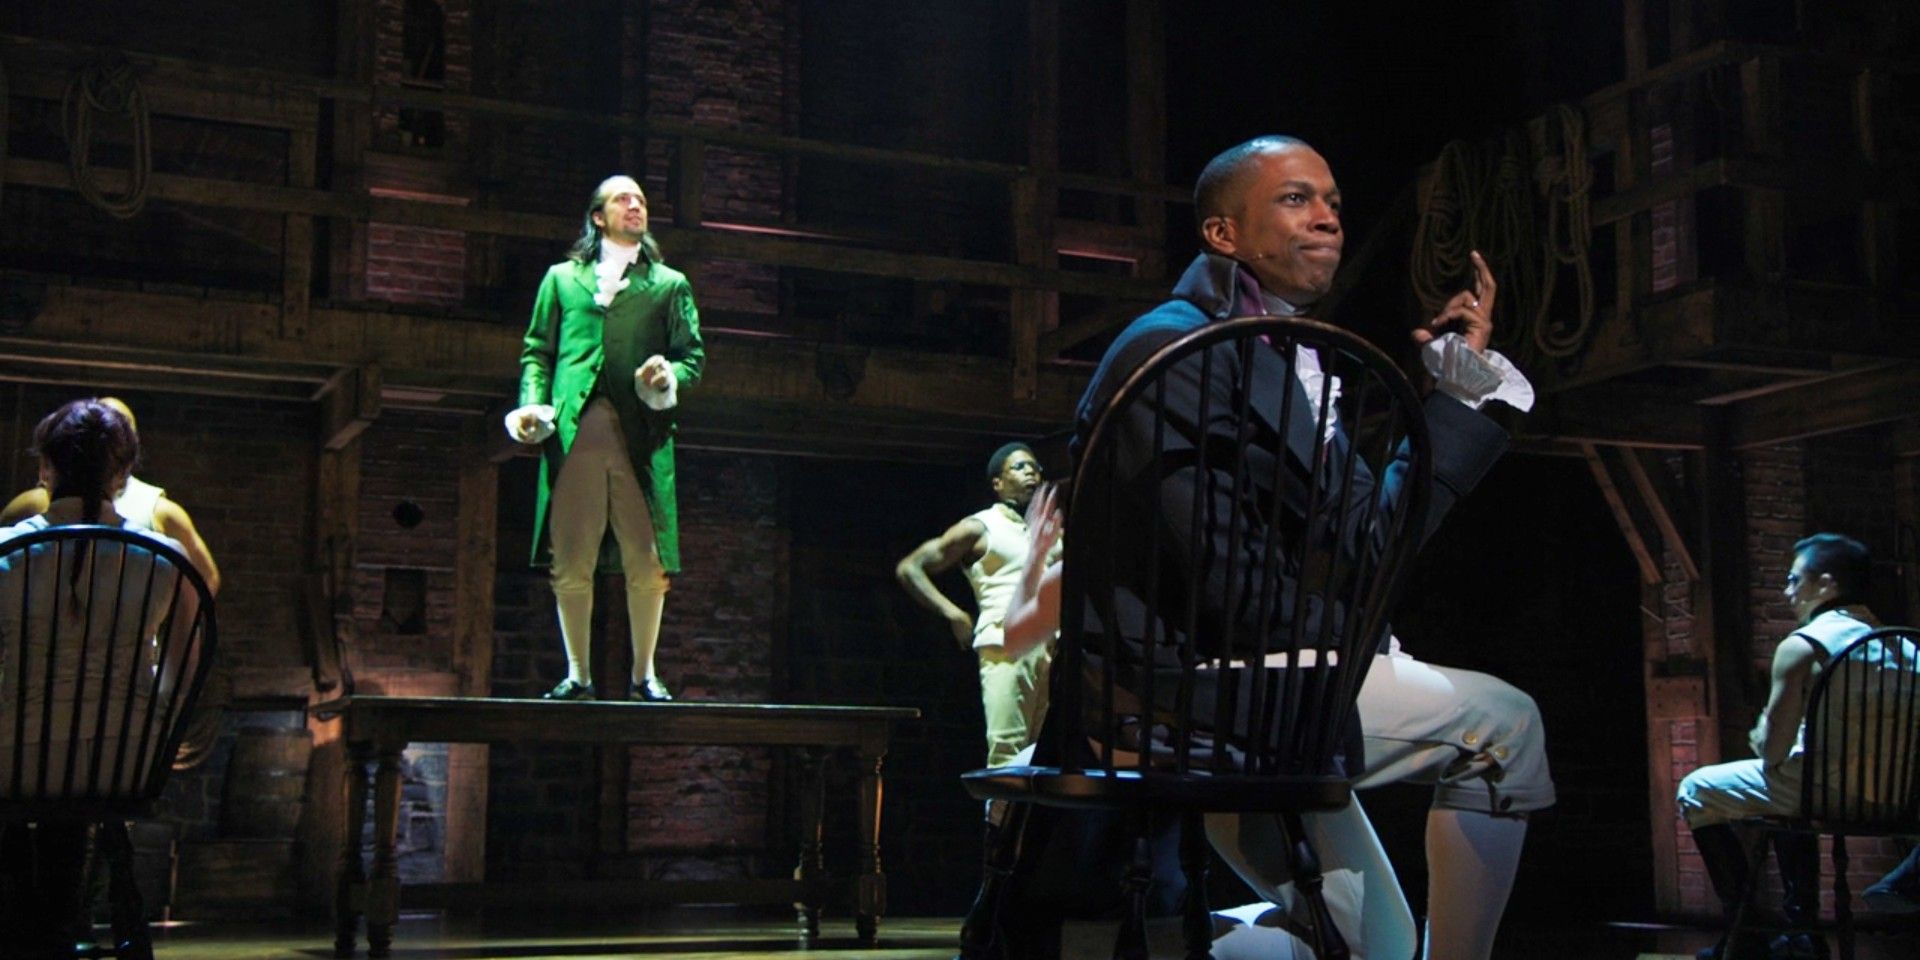 Hamilton stands on the table as Burr sings about him being non-stop in Hamilton